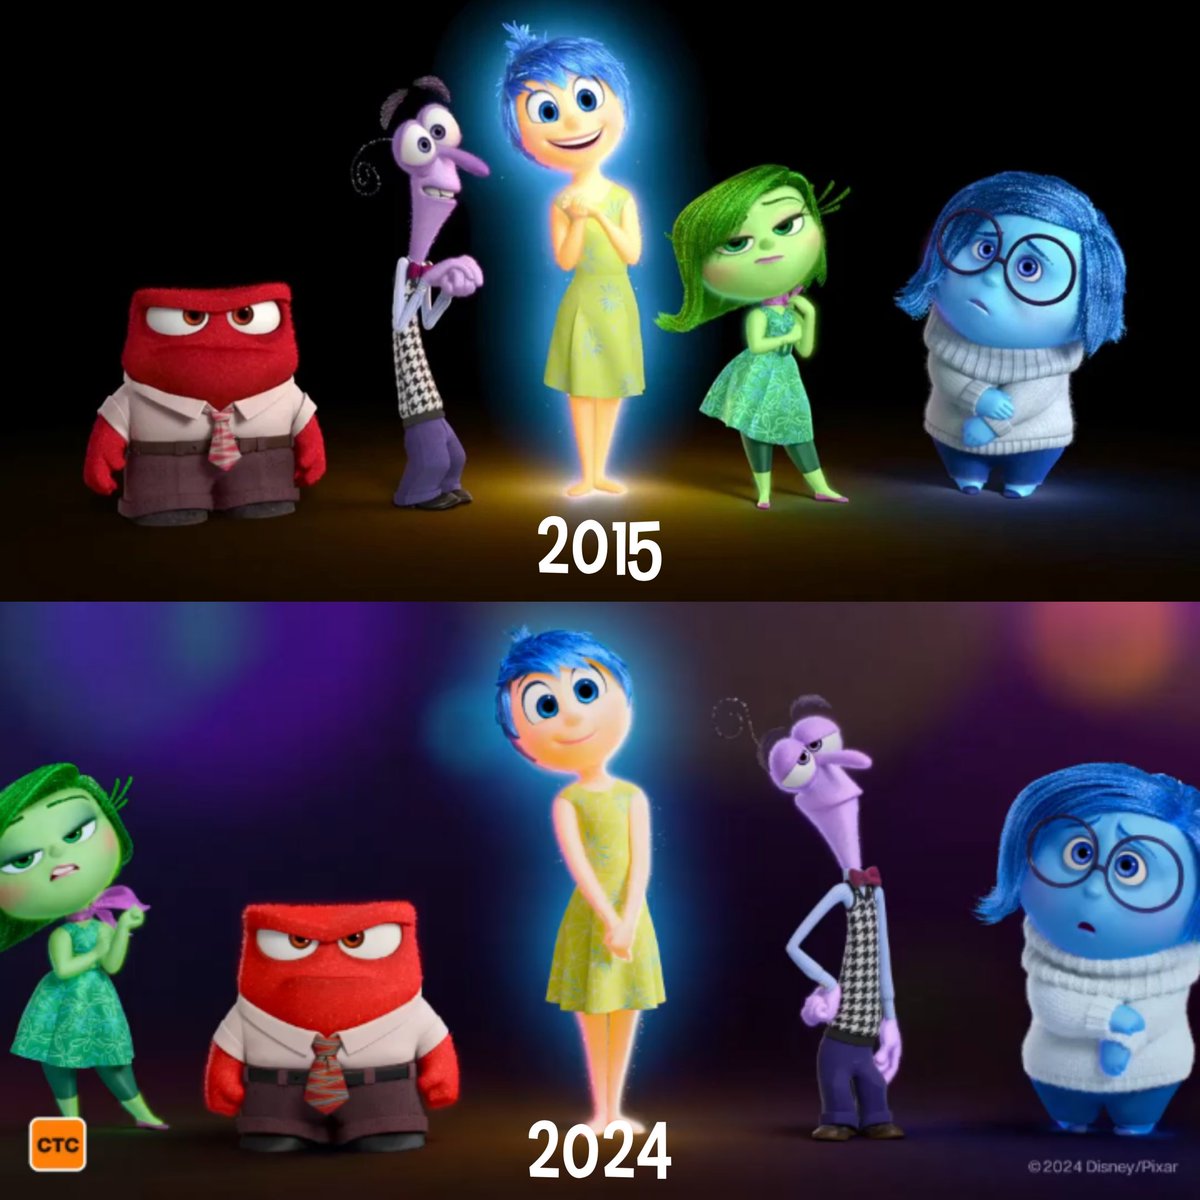 #InsideOut2 5 Emotions Copy and Paste
(2015-2024)